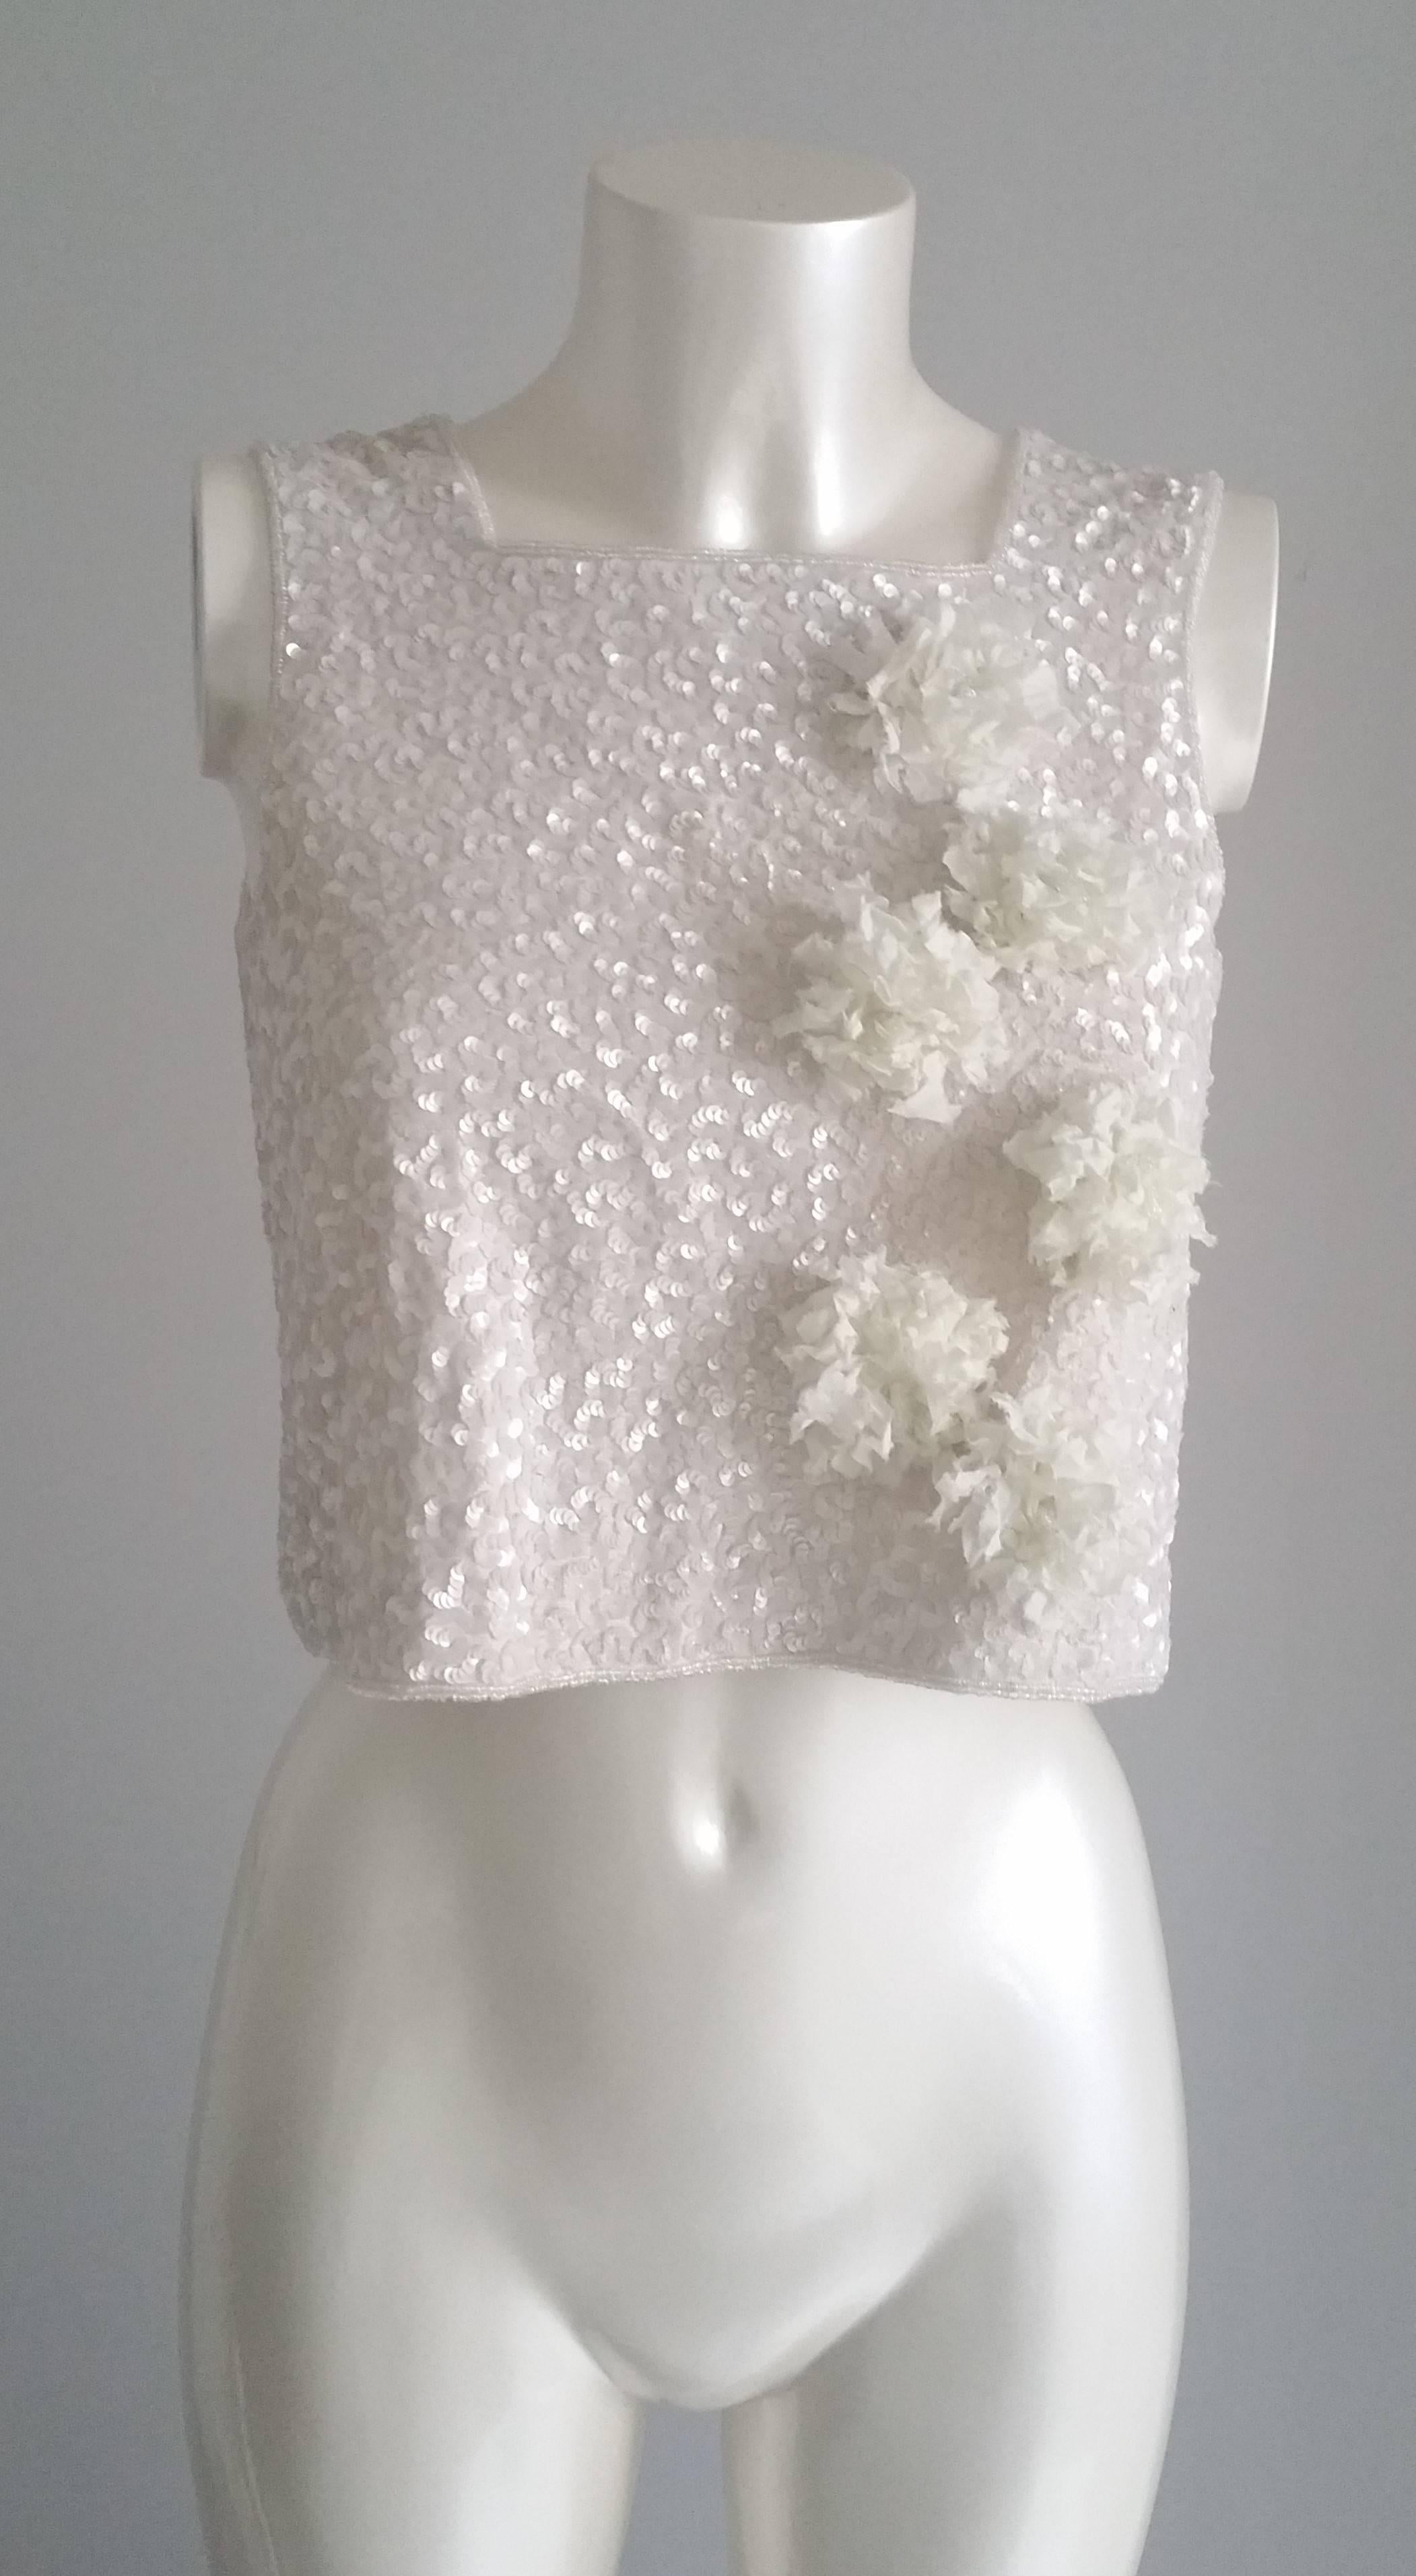 1970s Tailor made white with sequins shirt 
Flowers with small pearls on the left side 
Italian size range 